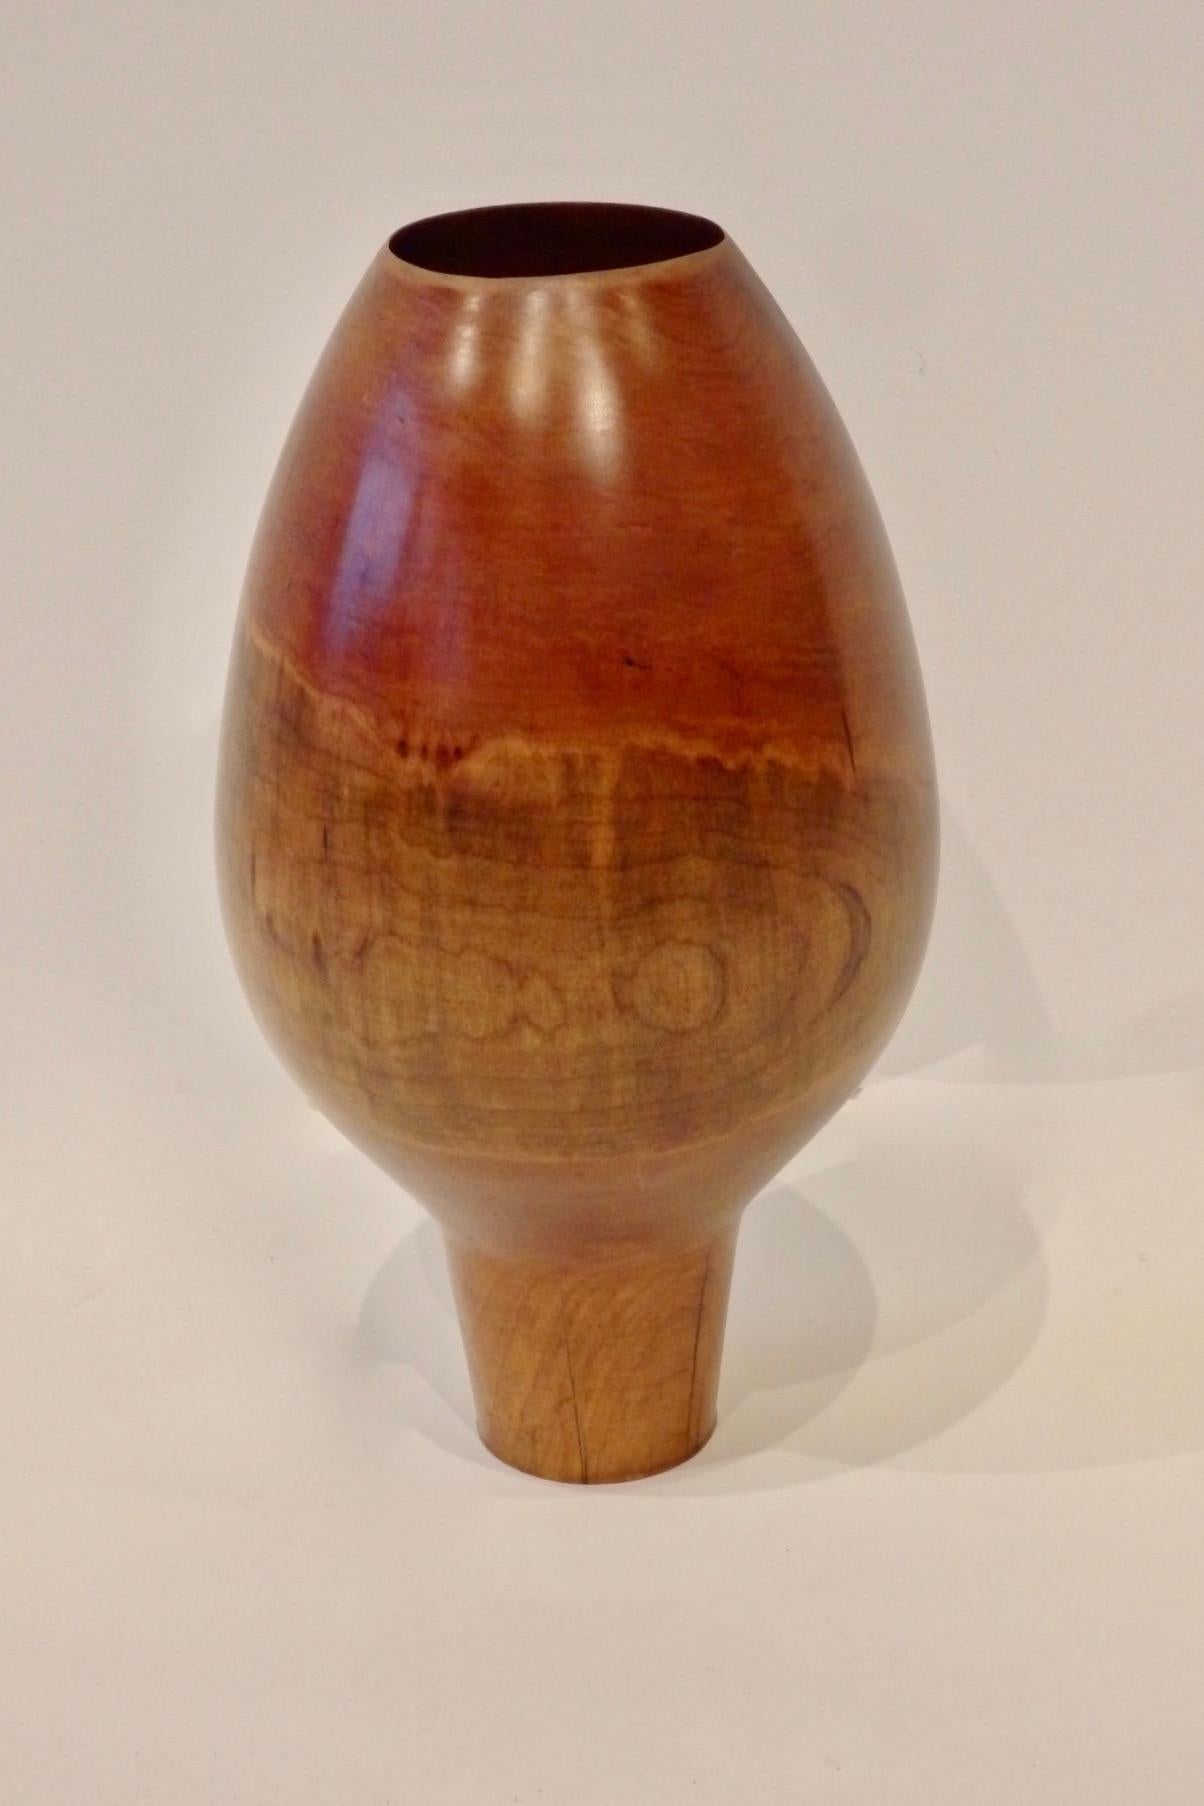 Large-scale turned cherrywood vessel signed Phillip Moulthrop Wild Cherry, numbered 3811. Minor loss of finish at opening.